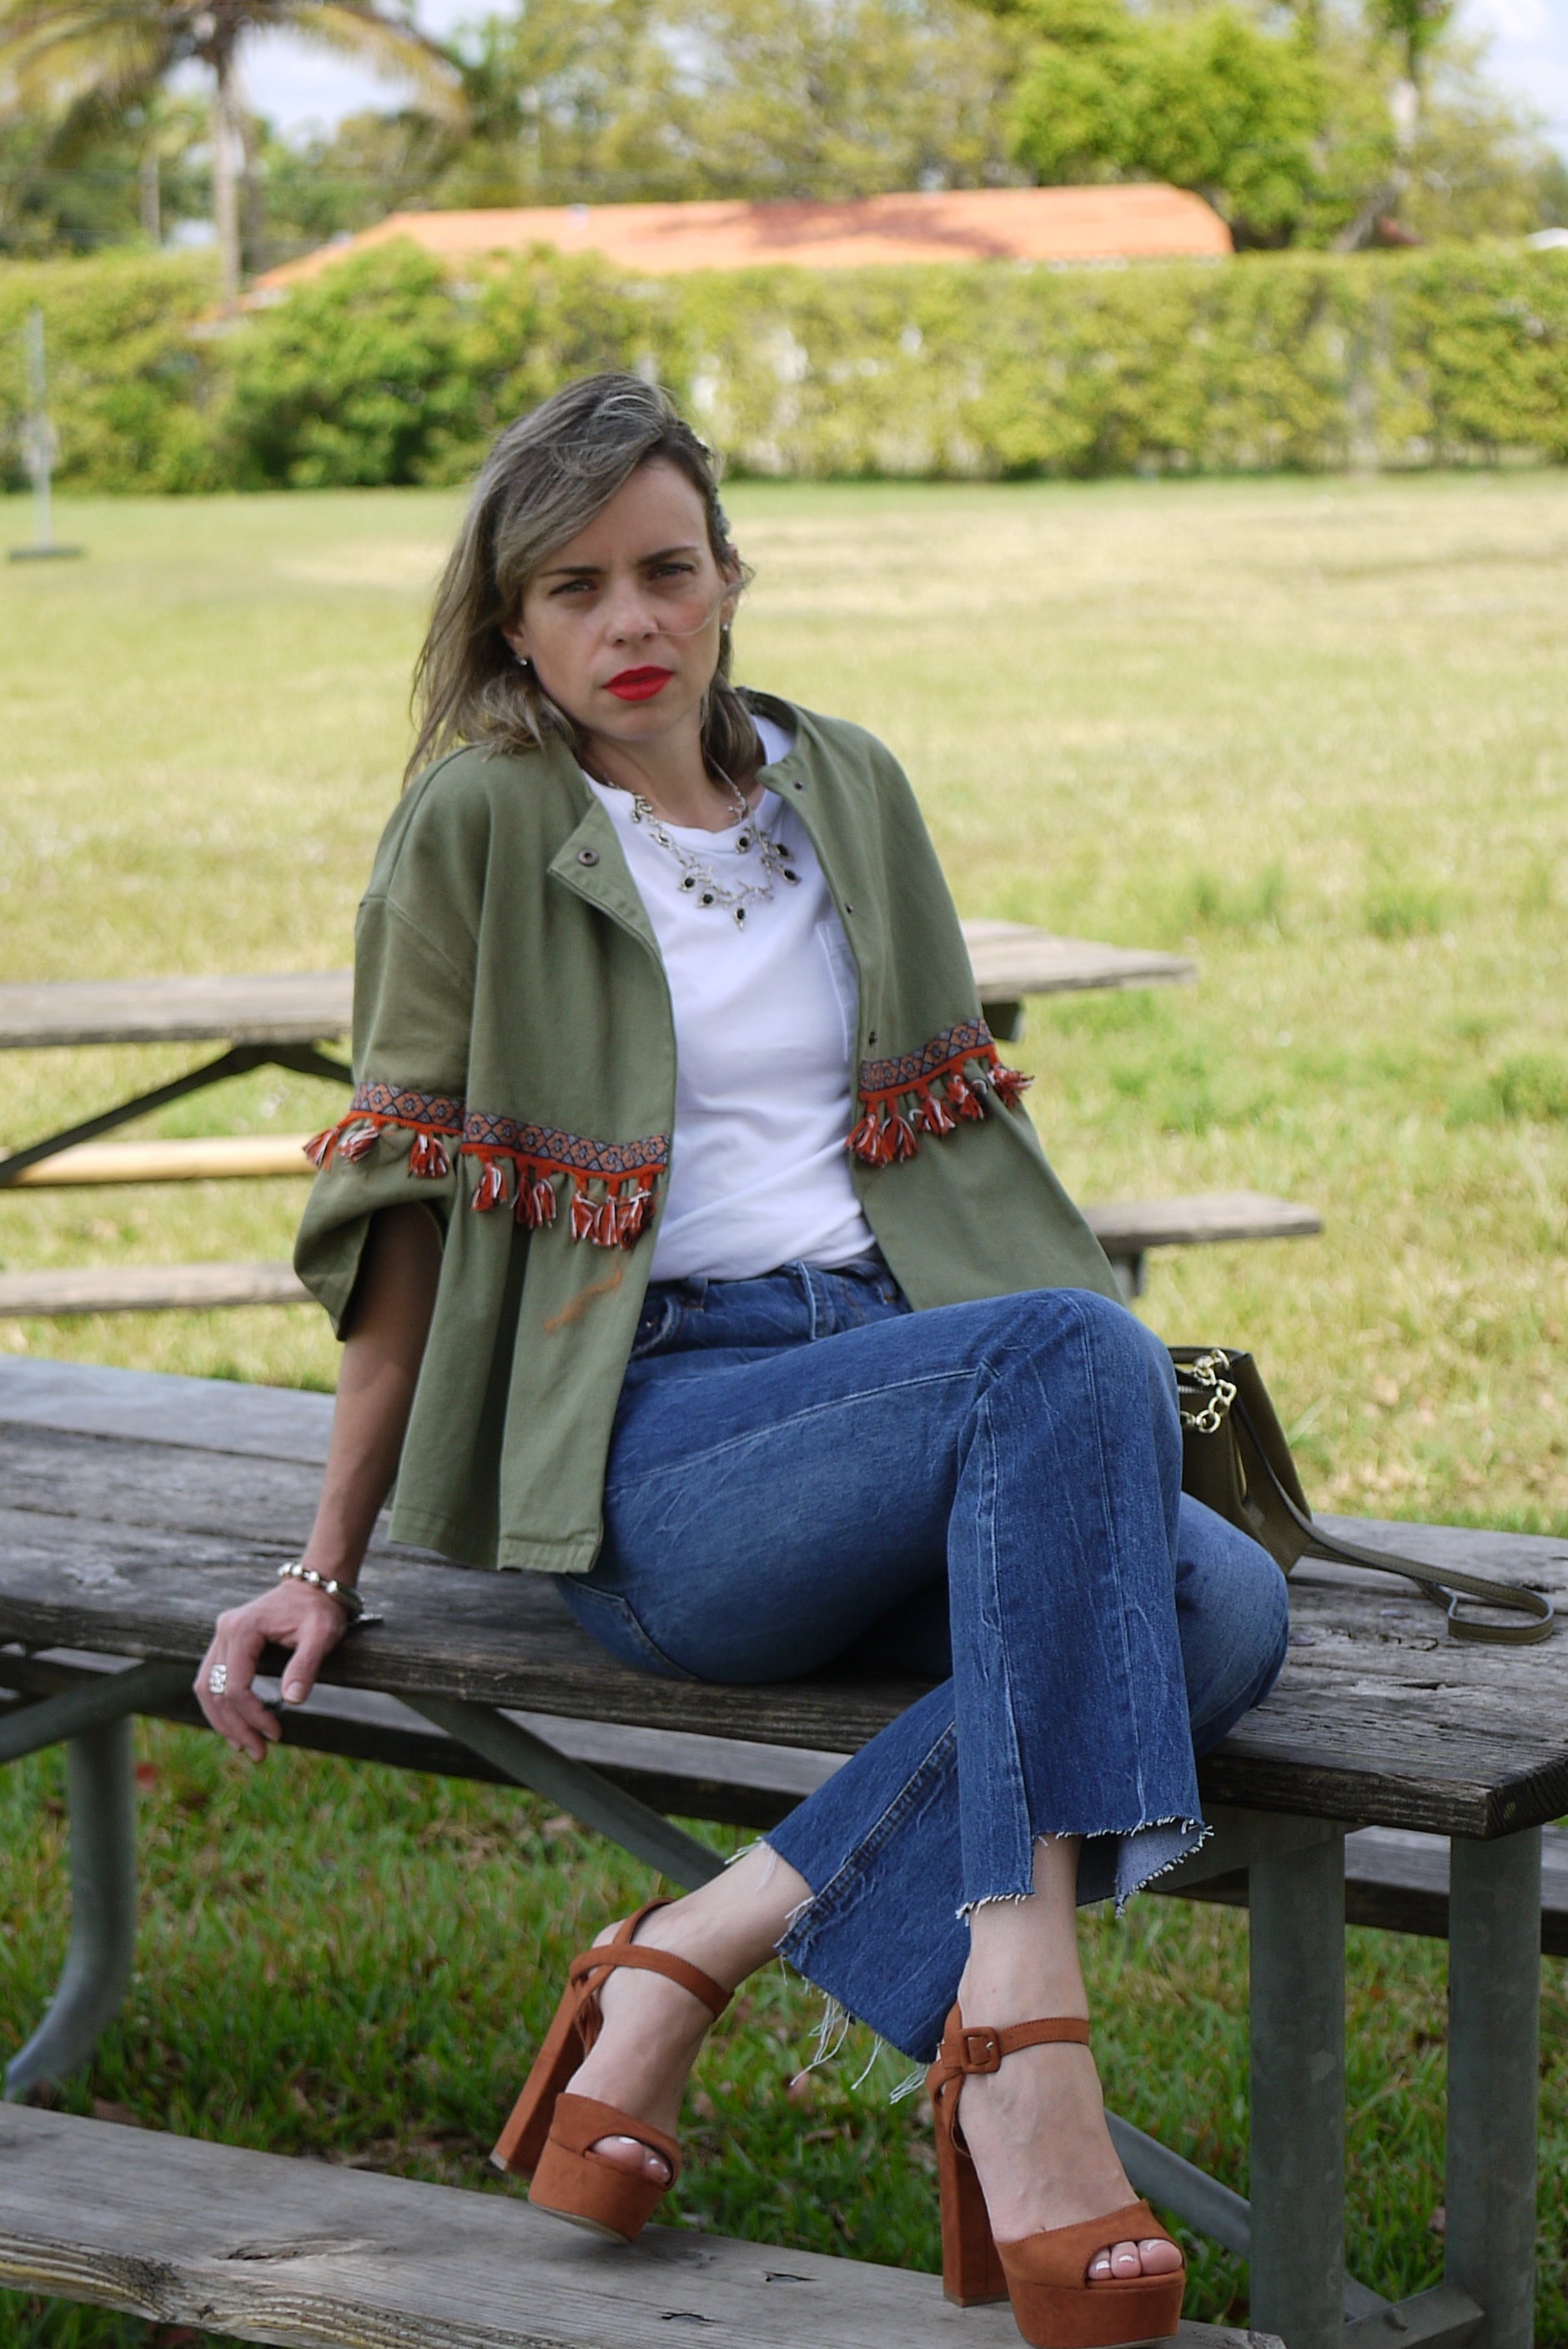 Boho kaki jacket + cropped jeans + brown sandals + silver jewels by Mylovelypeople